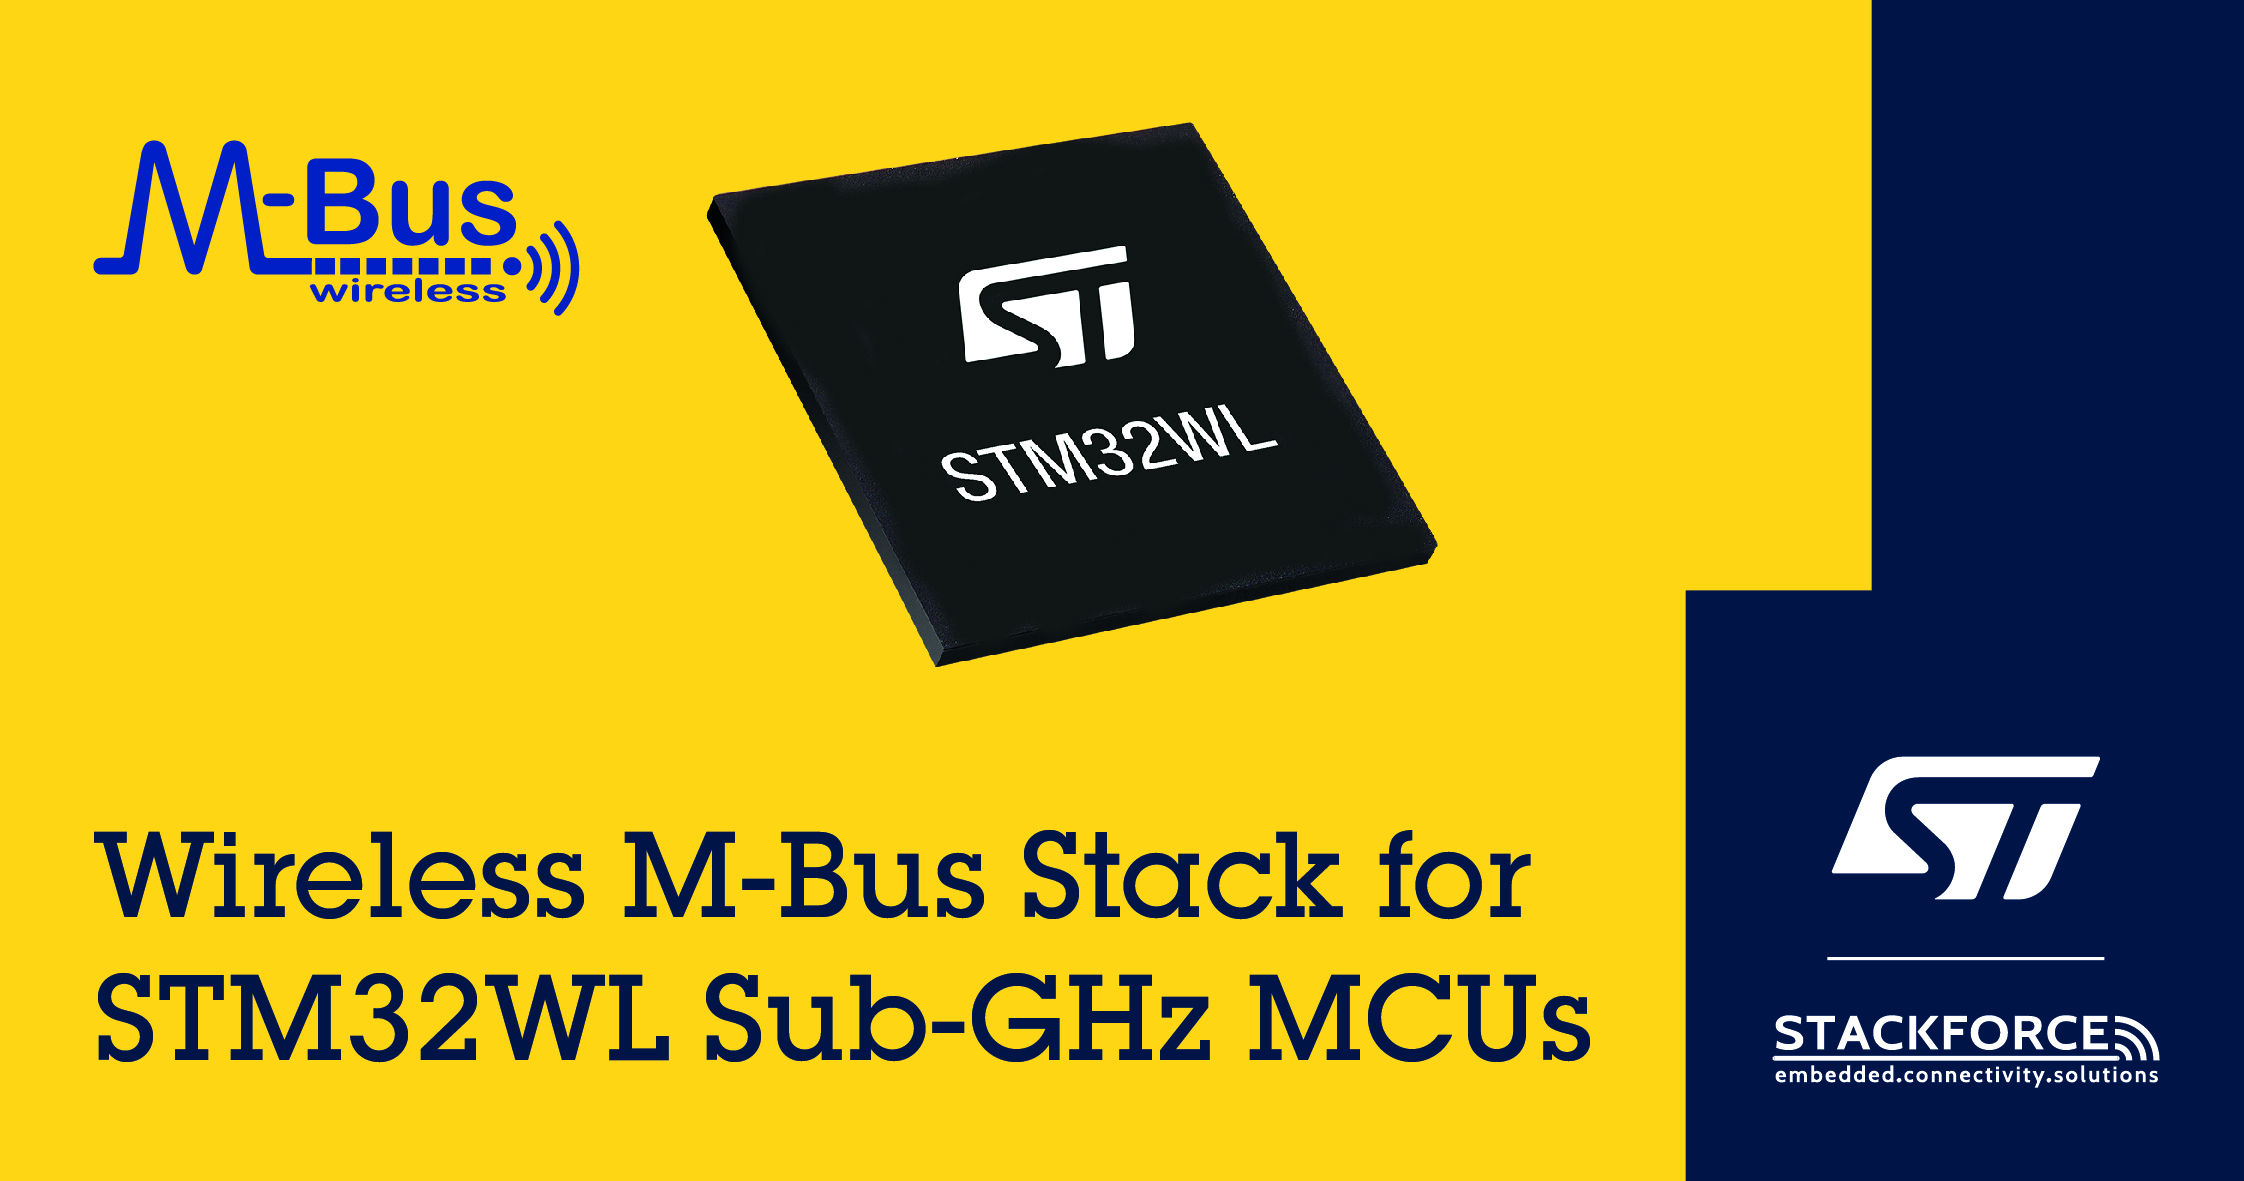 P4272S -- July 2 2020 -- STM32WL stacks from Stackforce_IMAGE